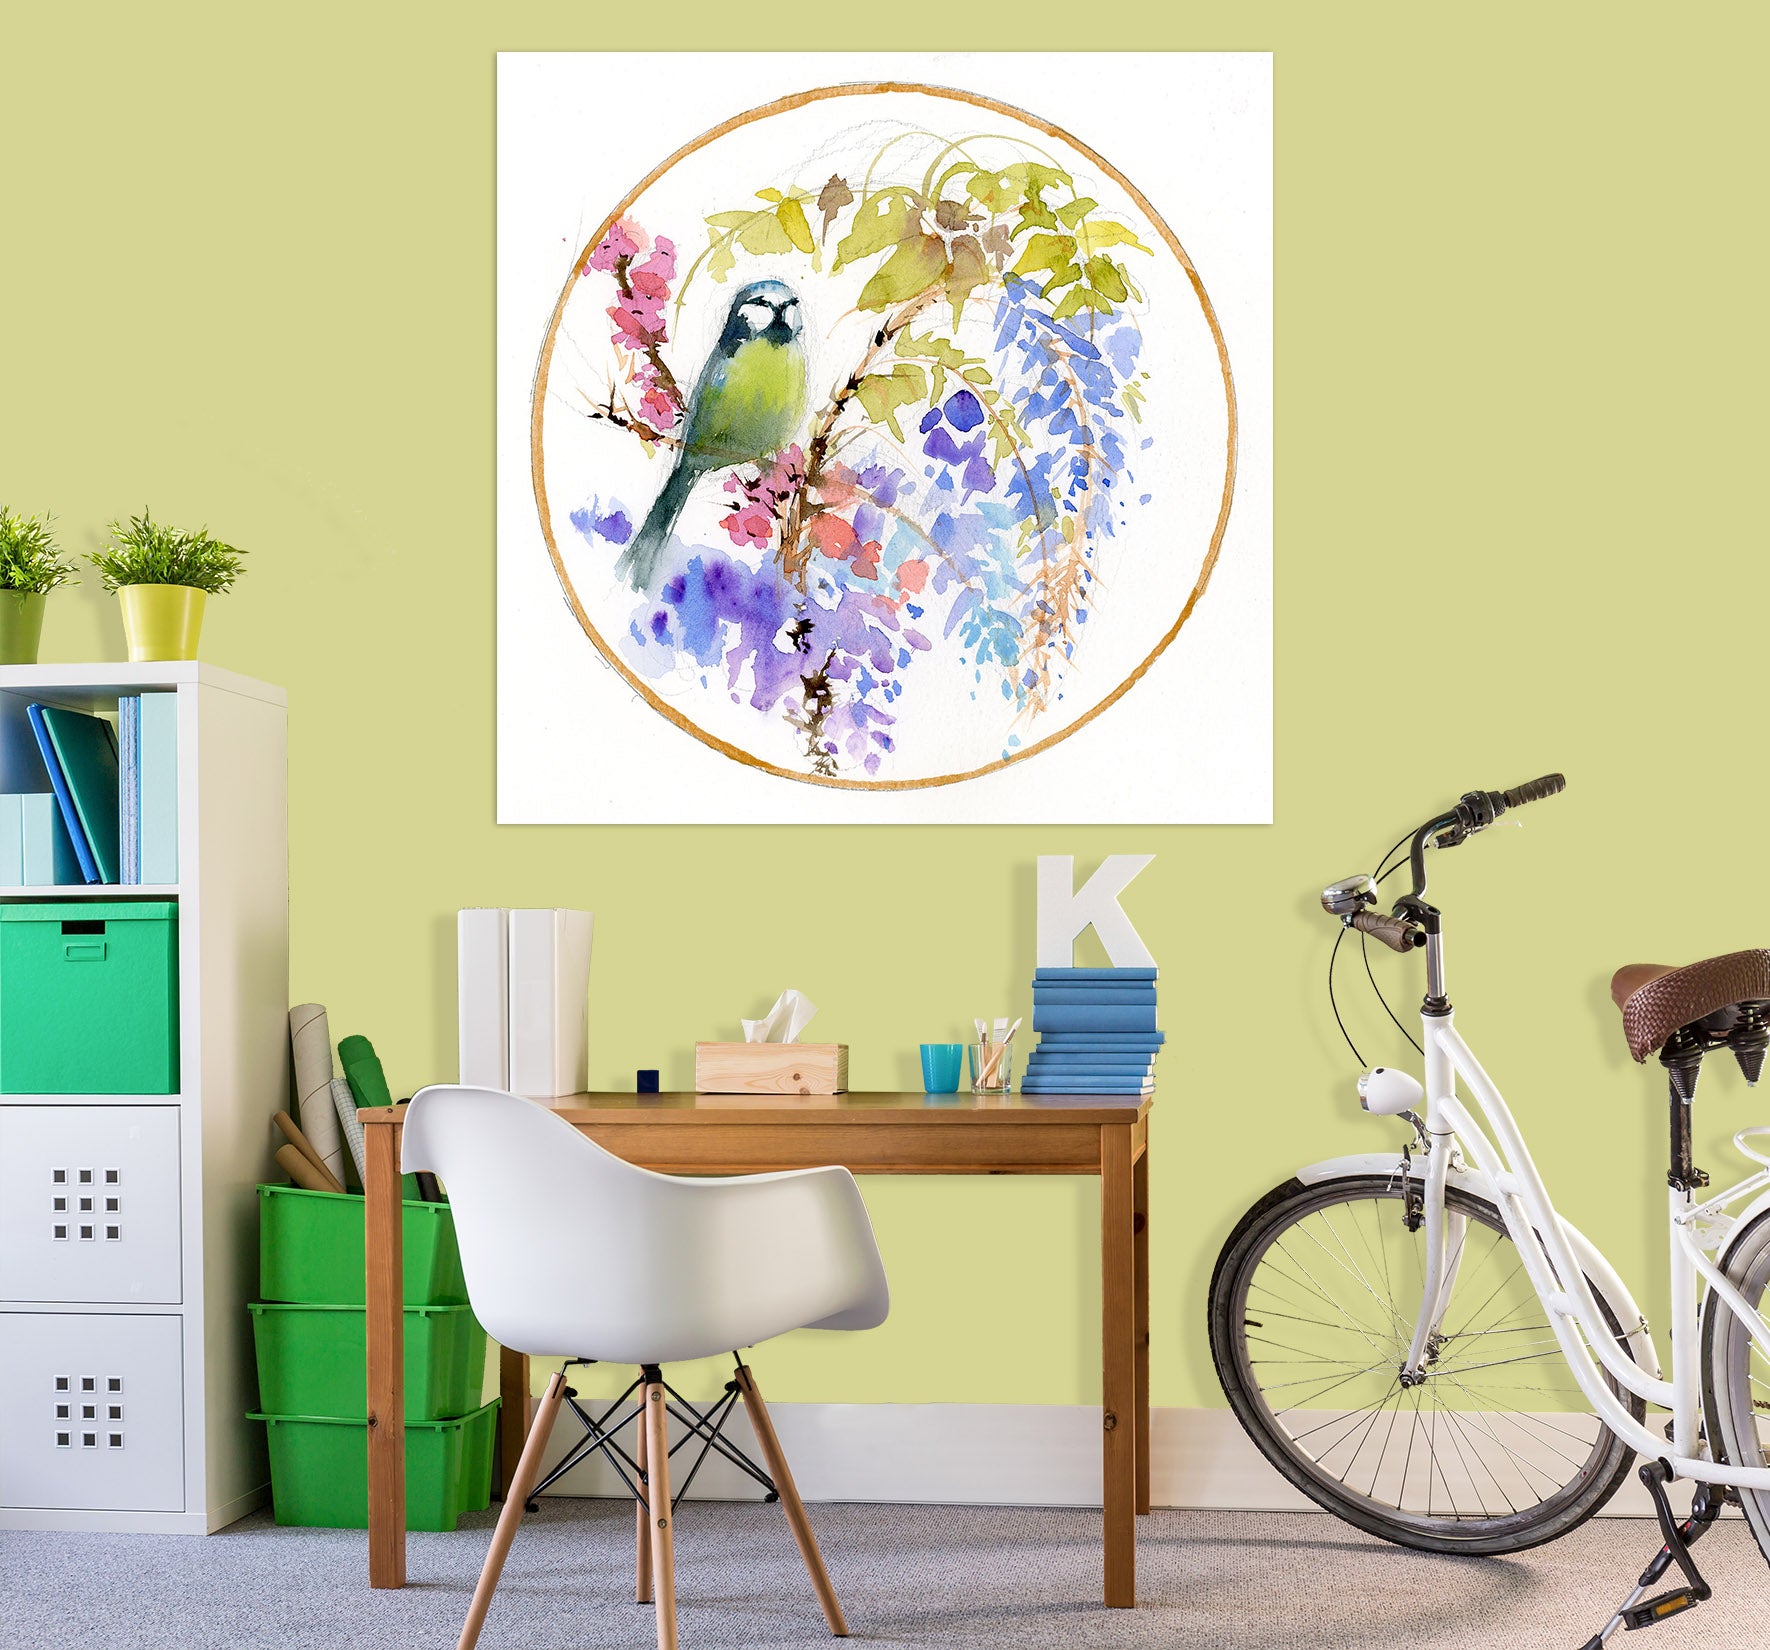 3D Embroidered Bird 002 Anne Farrall Doyle Wall Sticker